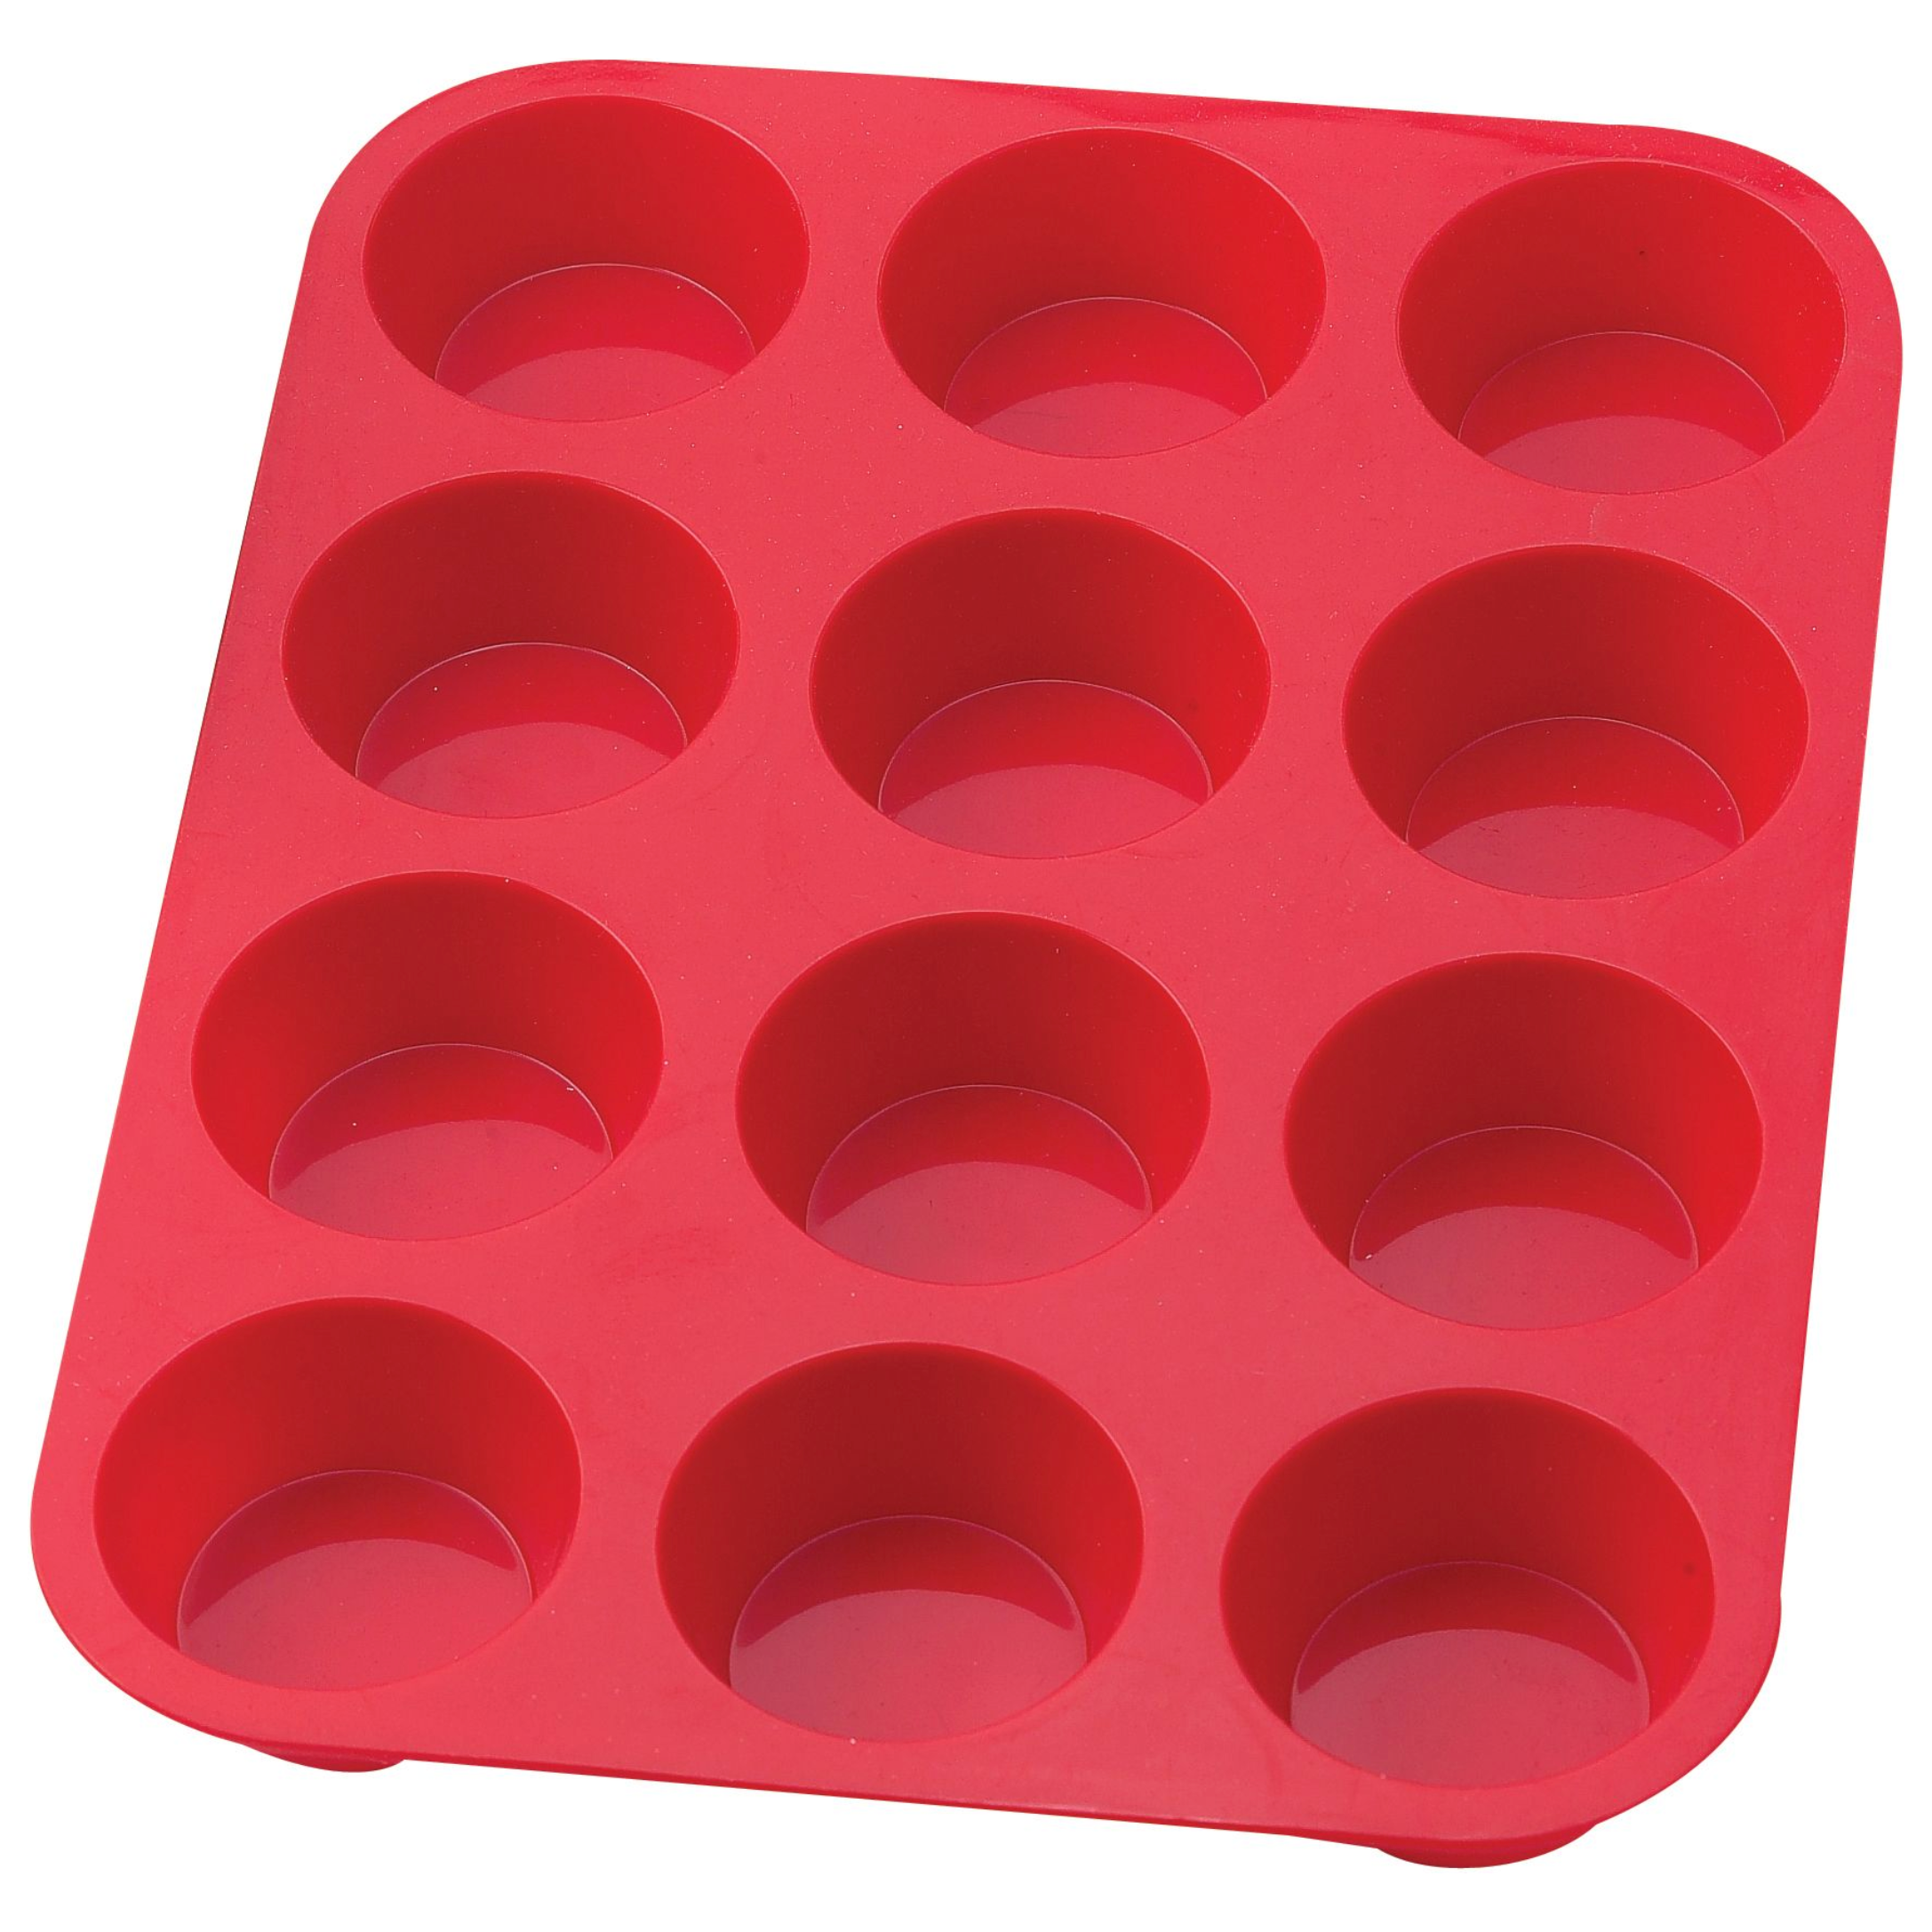 HAROLD IMPORTS SILICONE MUFFIN CUPS